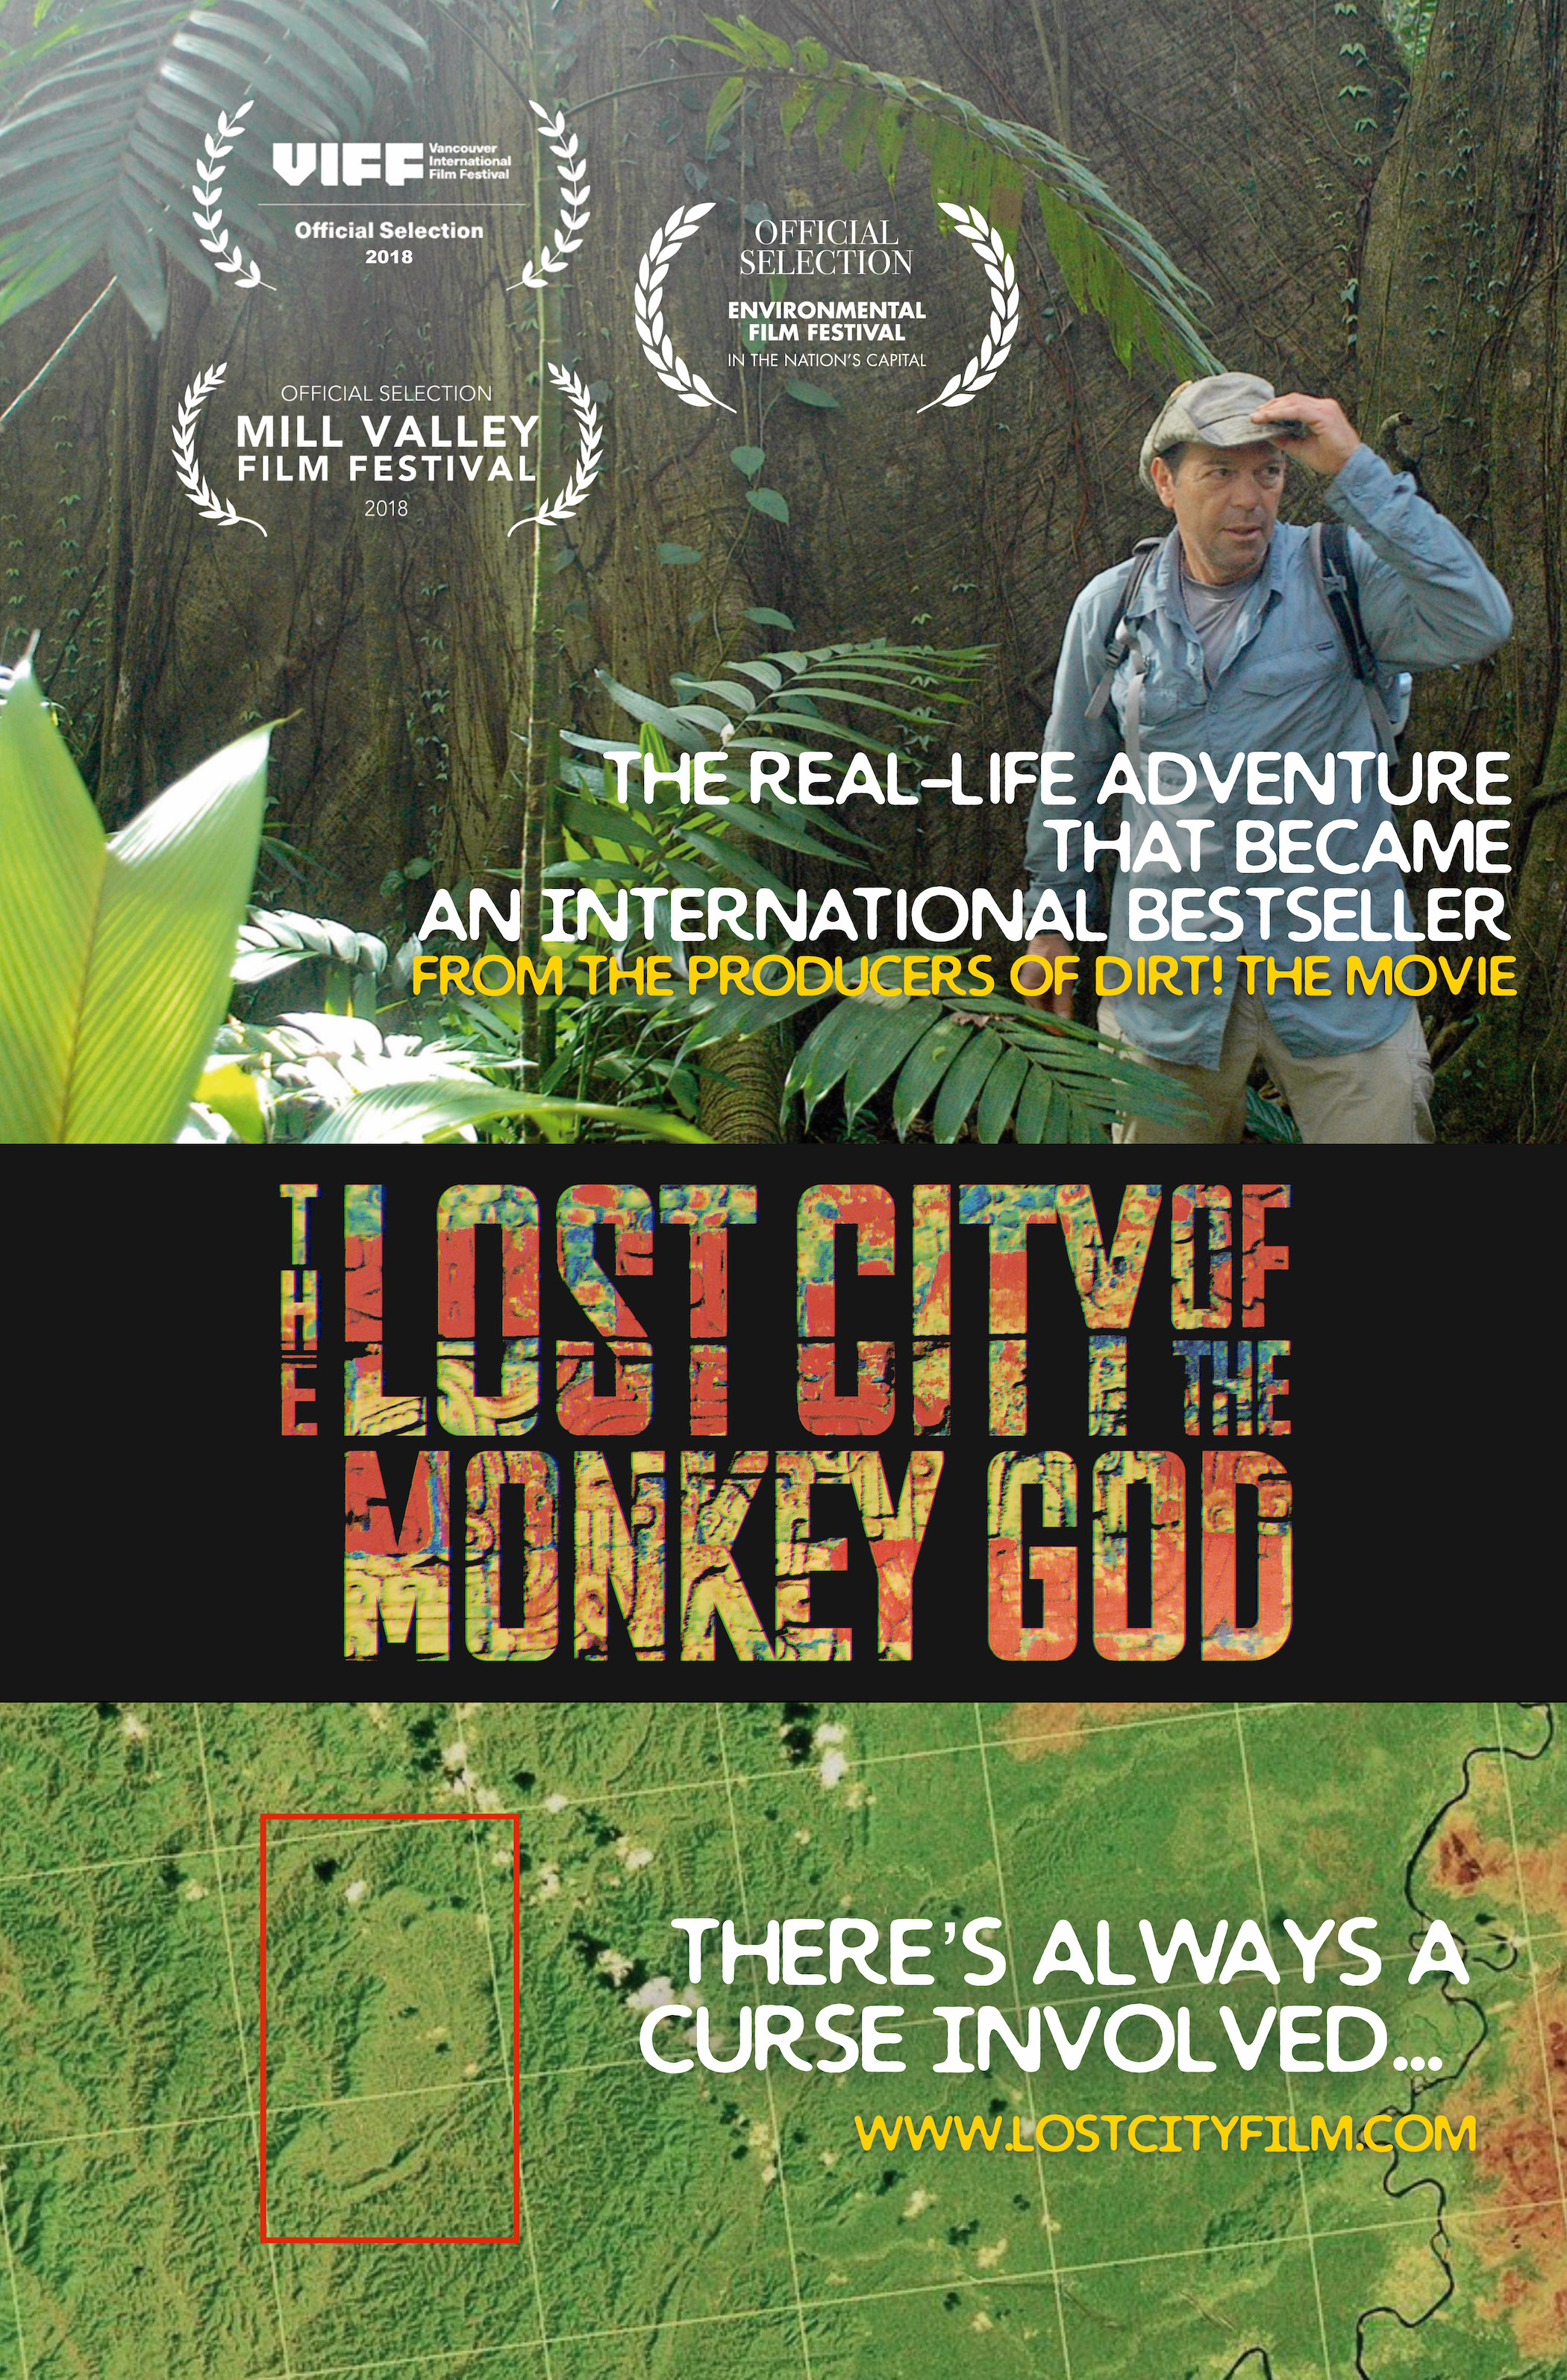 WILLIAM MORRIS ENDEAVOR TO REPRESENT ‘THE LOST CITY OF THE MONKEY GOD’